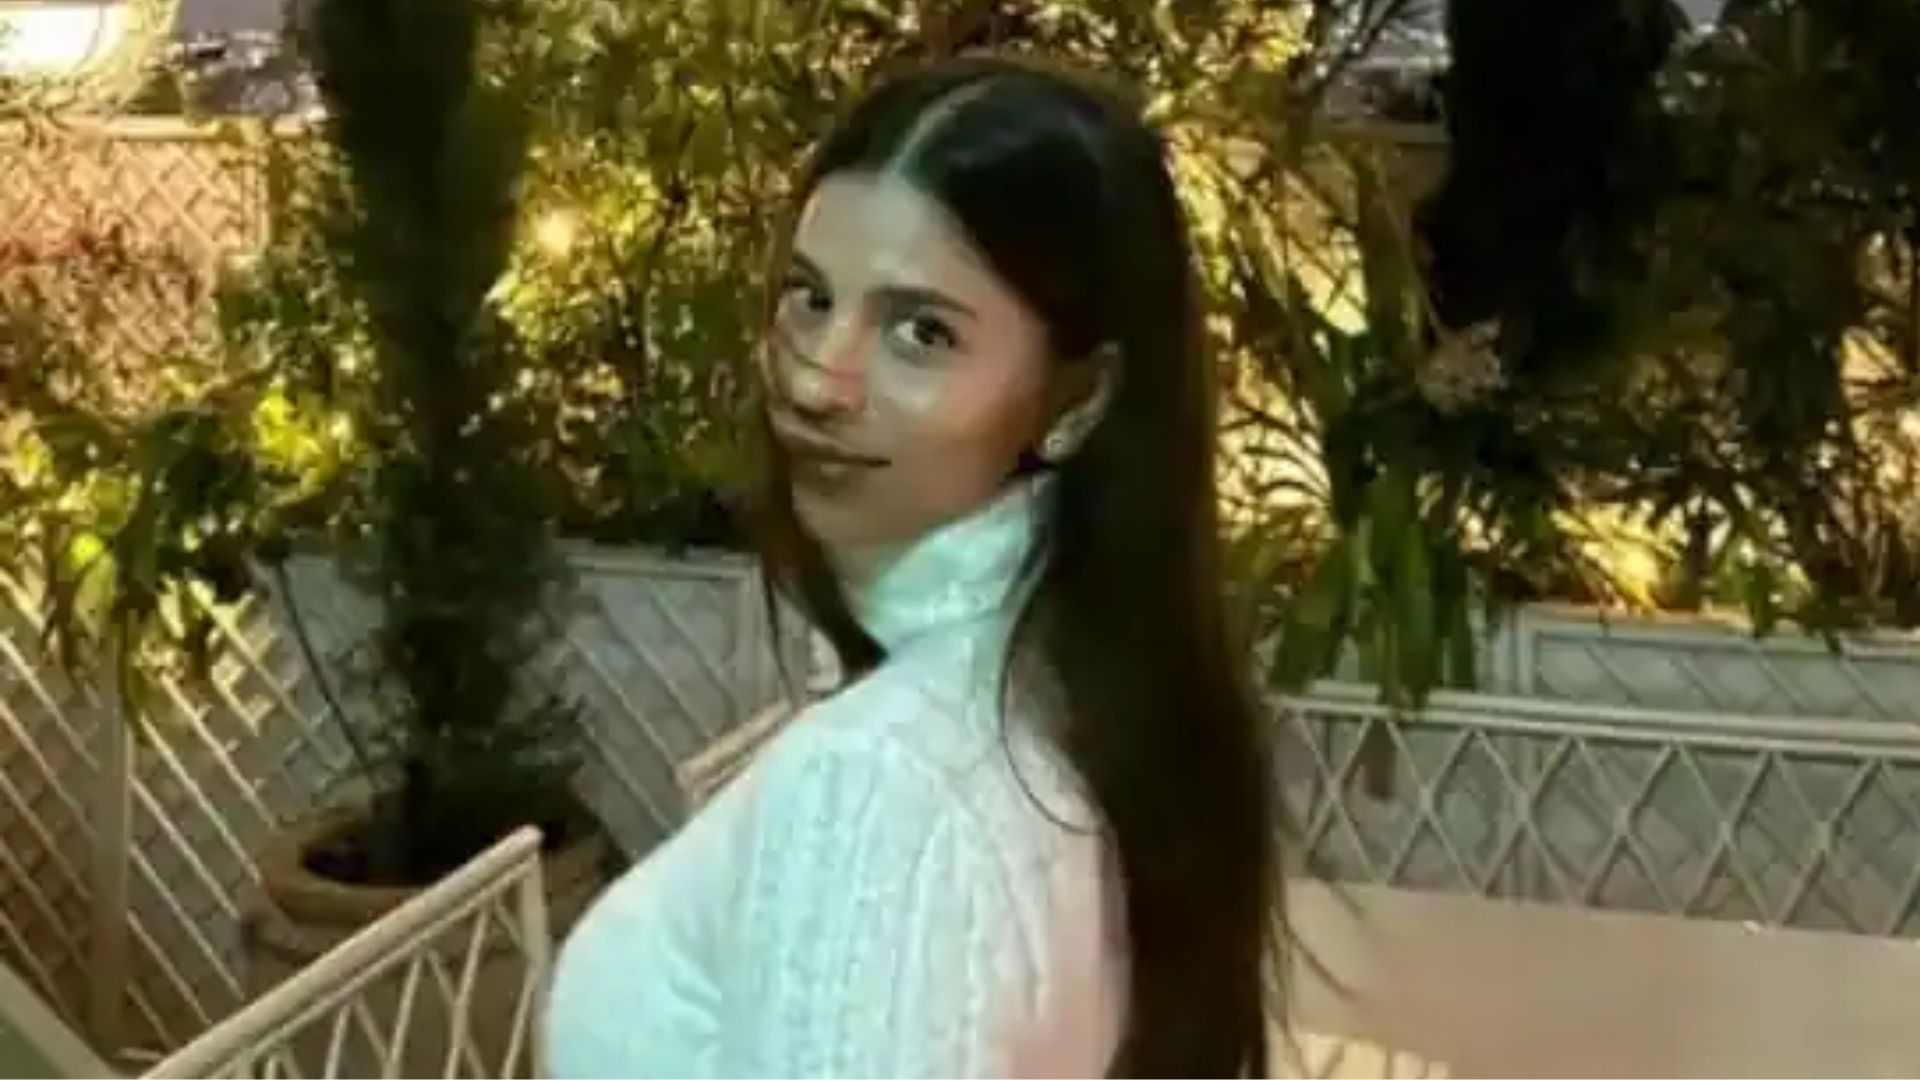 Suhana Khan shares pictures from her Paris trip, featuring Ananya Panday